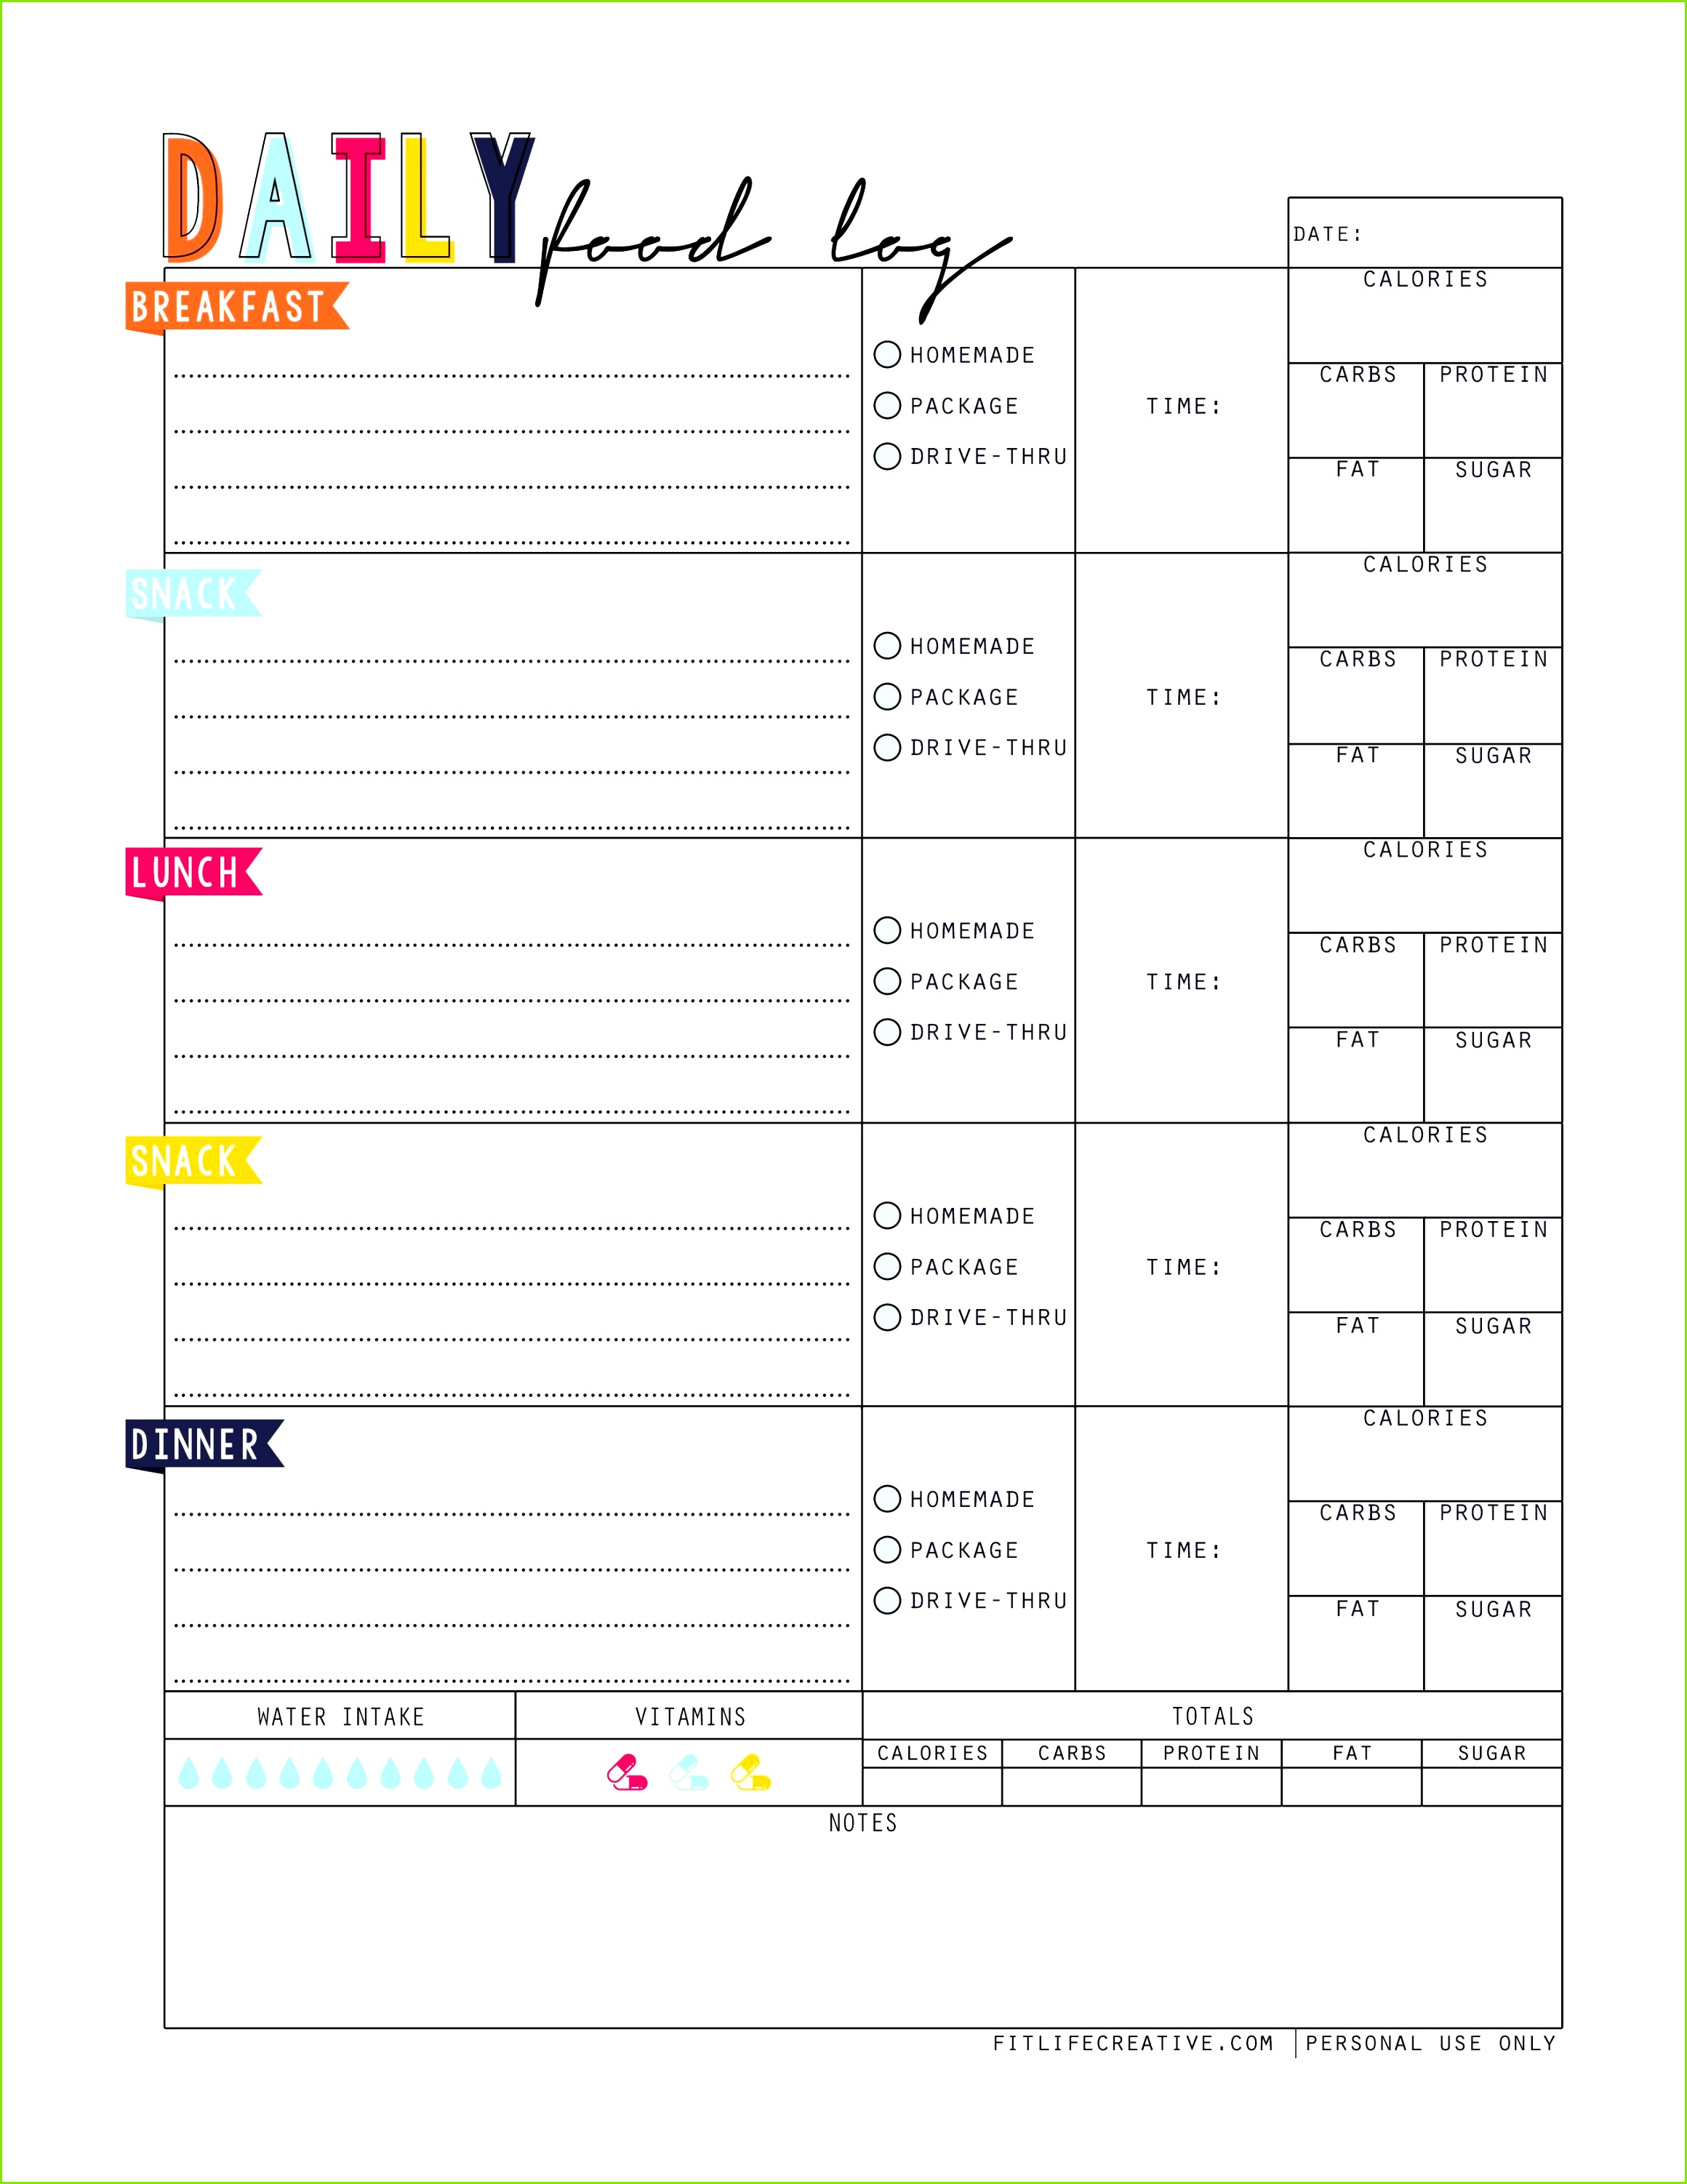 Daily Food Log Printable A successful health and fitness journey starts in the kitchen The